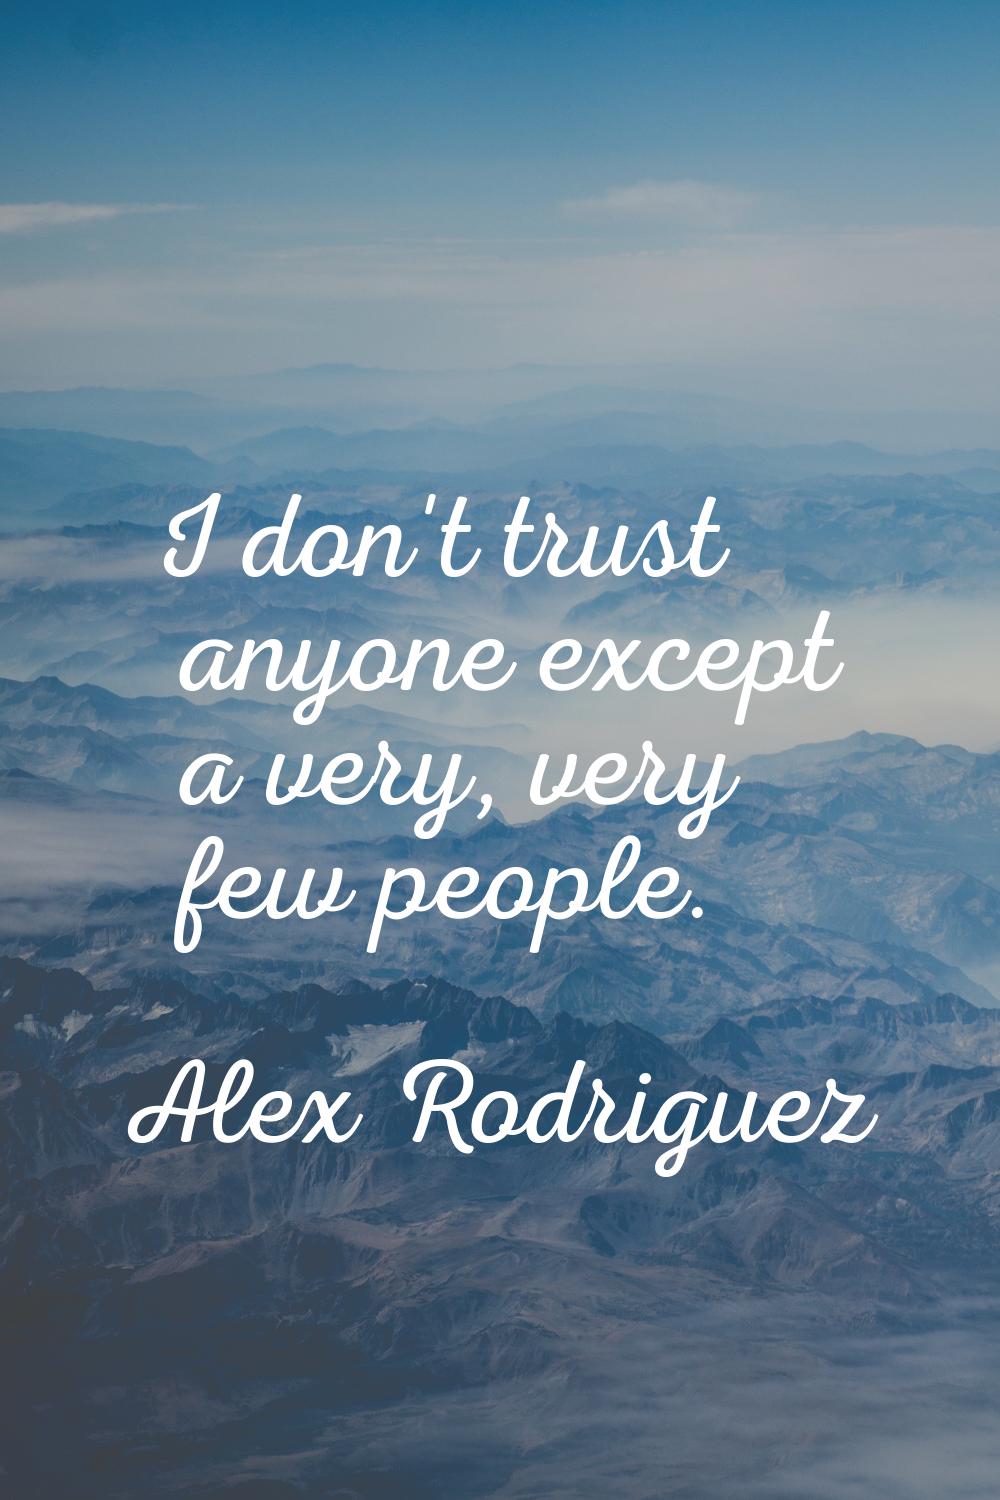 I don't trust anyone except a very, very few people.